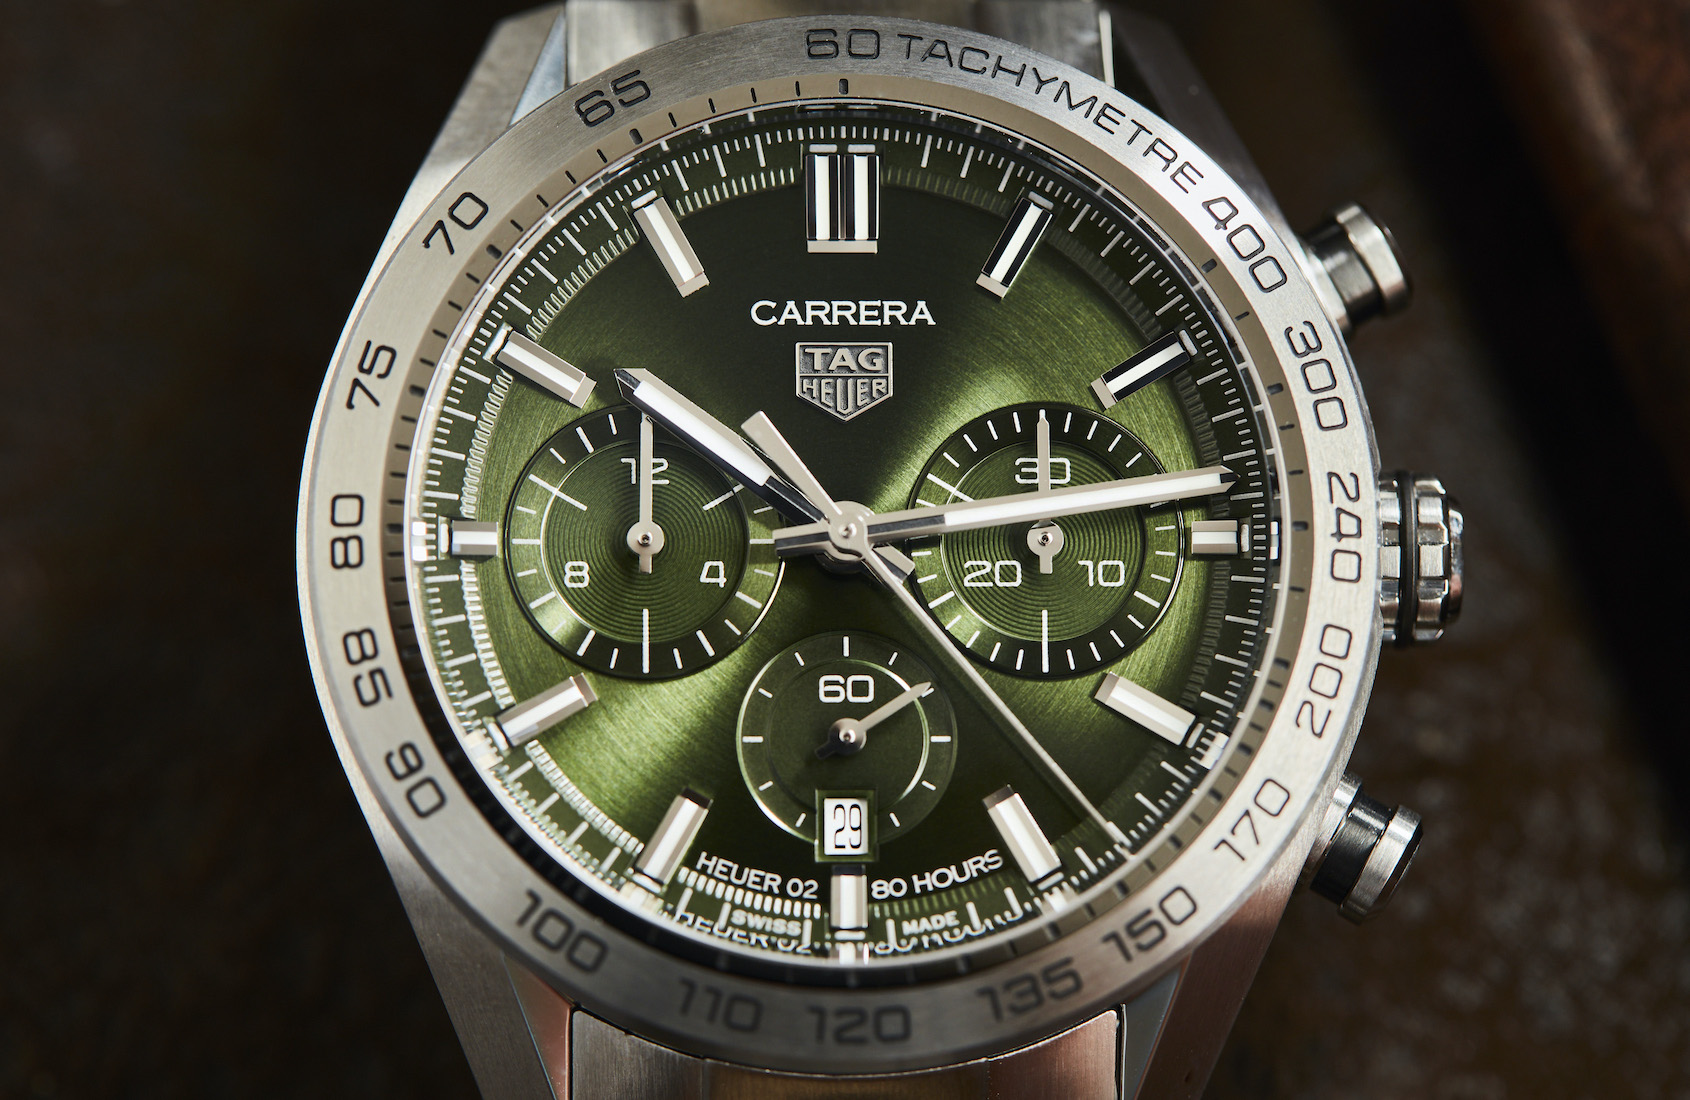 The best fake TAG Heuer is with high cost performance.